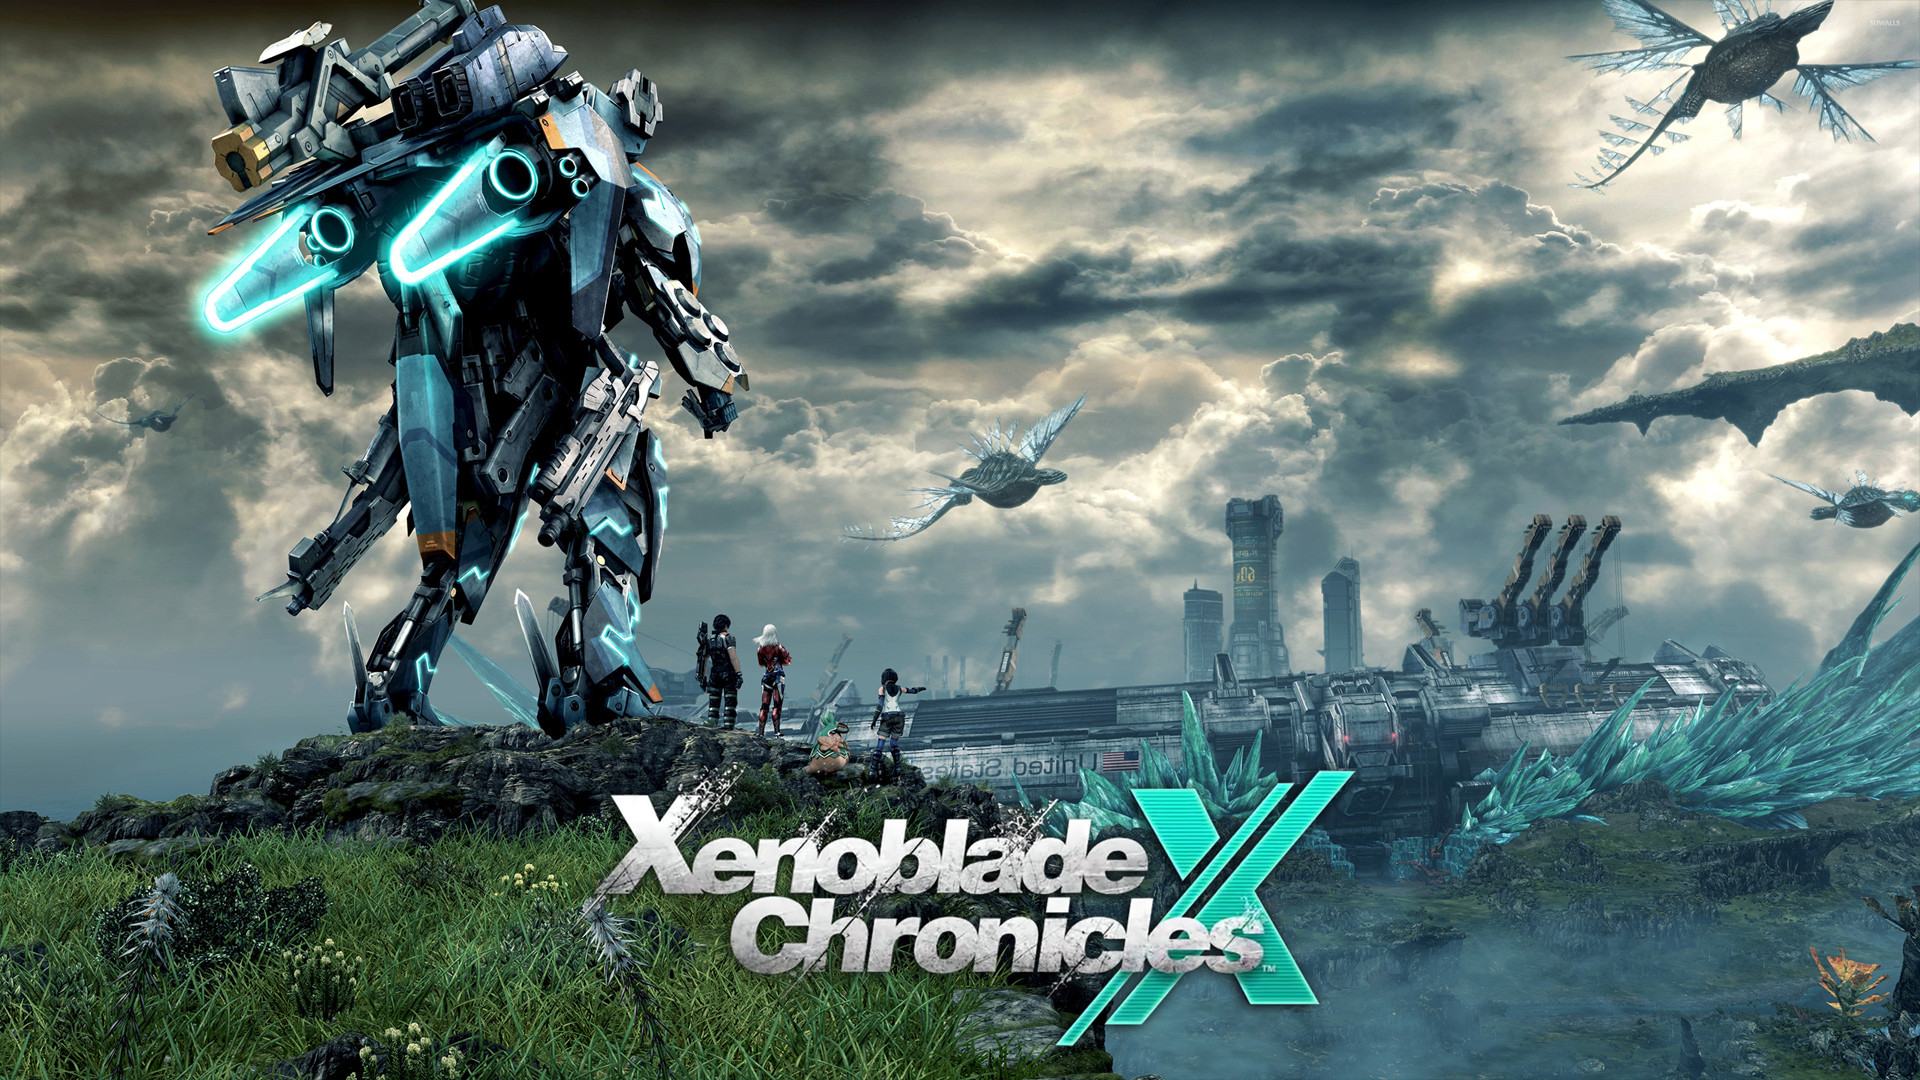 1920x1080 Mech and its companions Wallpaper from Xenoblade Chronicles X